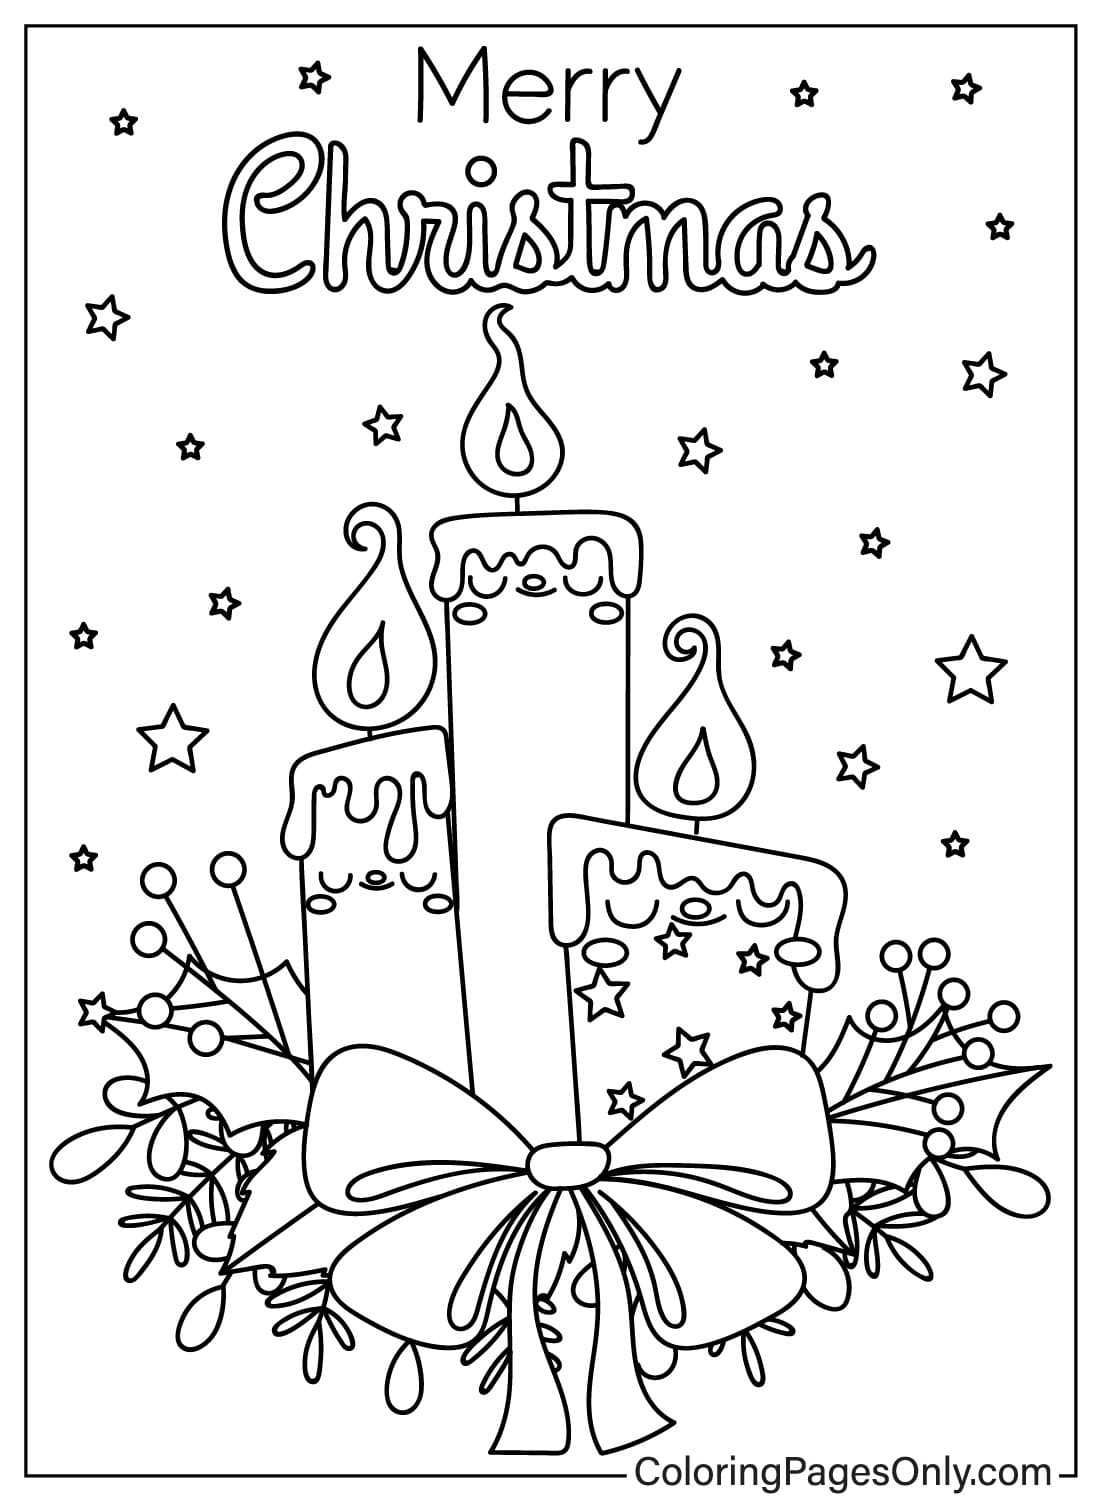 Christmas Candles Images to Color - Free Printable Coloring Pages